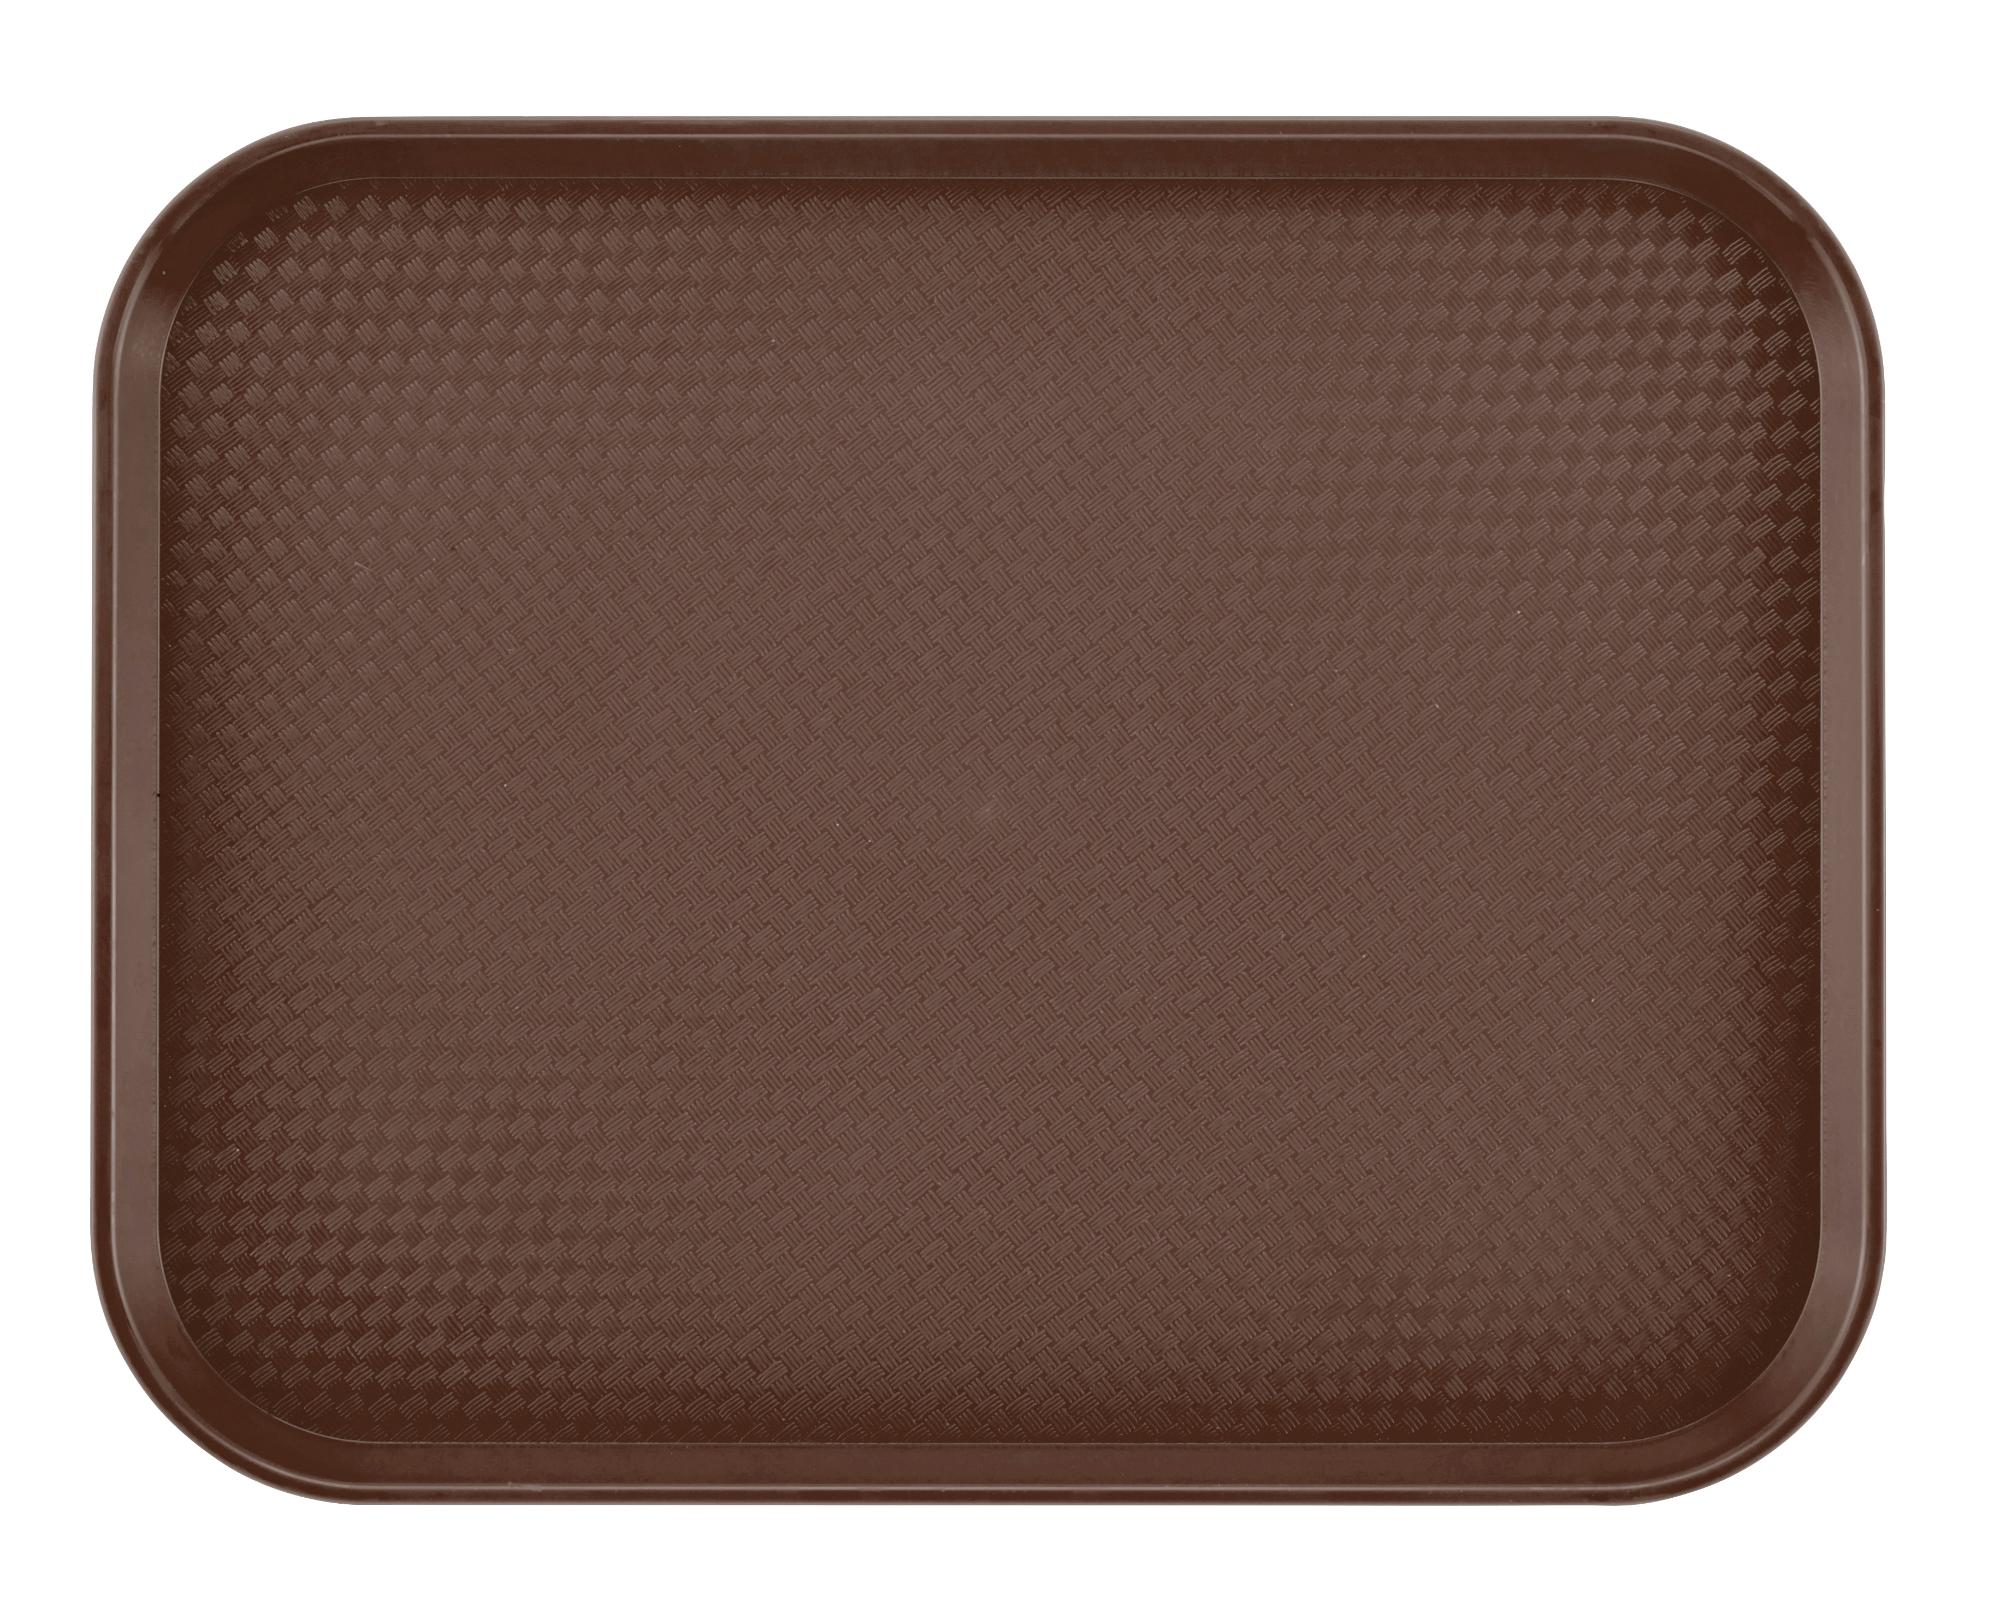 Fast Food polypropylene tray, textured surface, brown, 355x457 mm